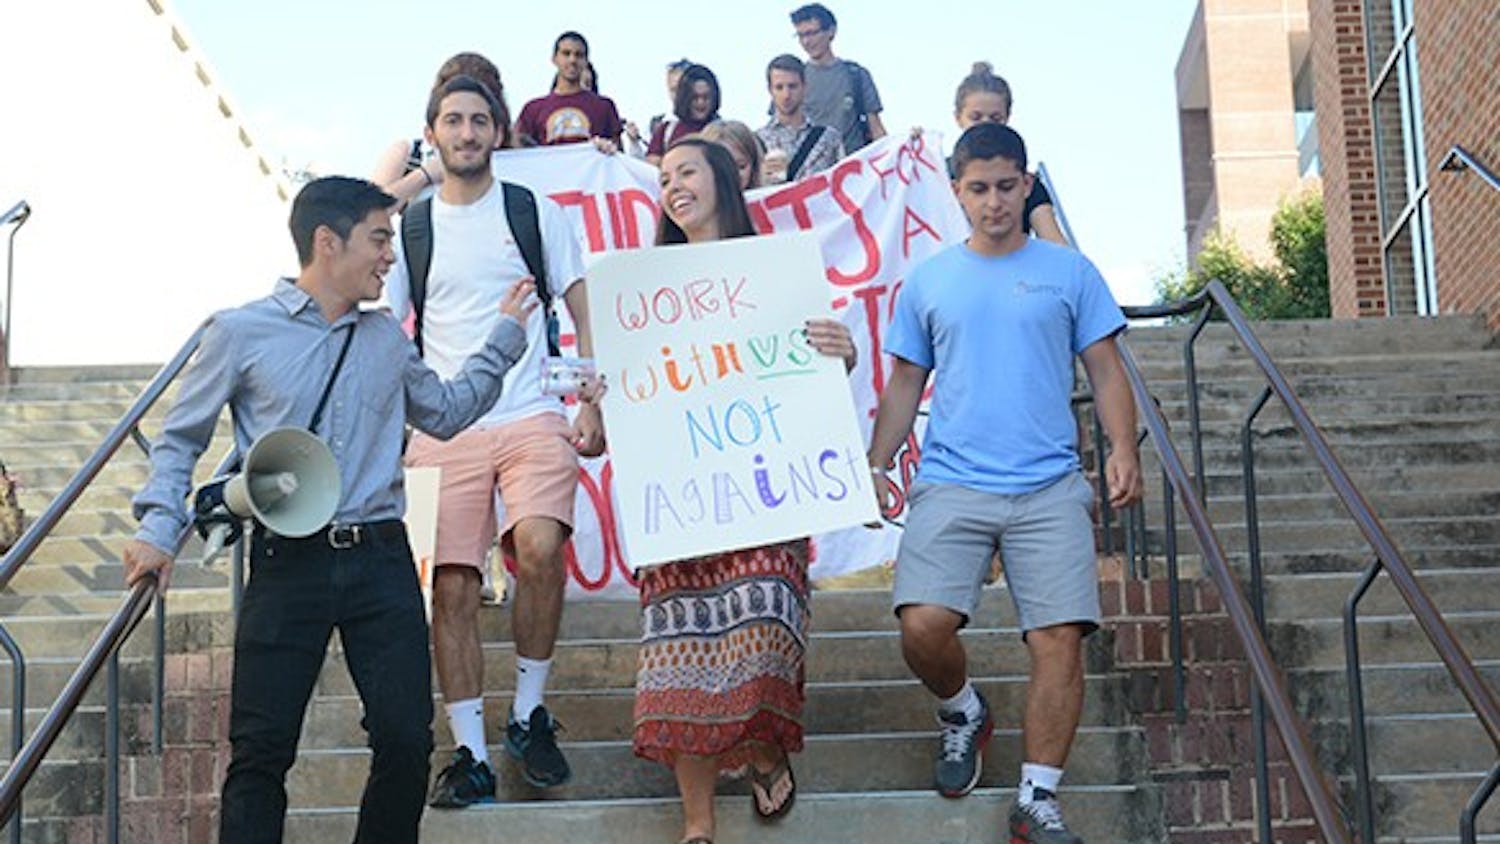 Members of the Students for a Democratic Society march together protesting the Board of Governor's decision against Gender-Neutral housing earlier this year. They marched from the pit to the General Administration building, where the Board of Governors was holding its monthly meeting.